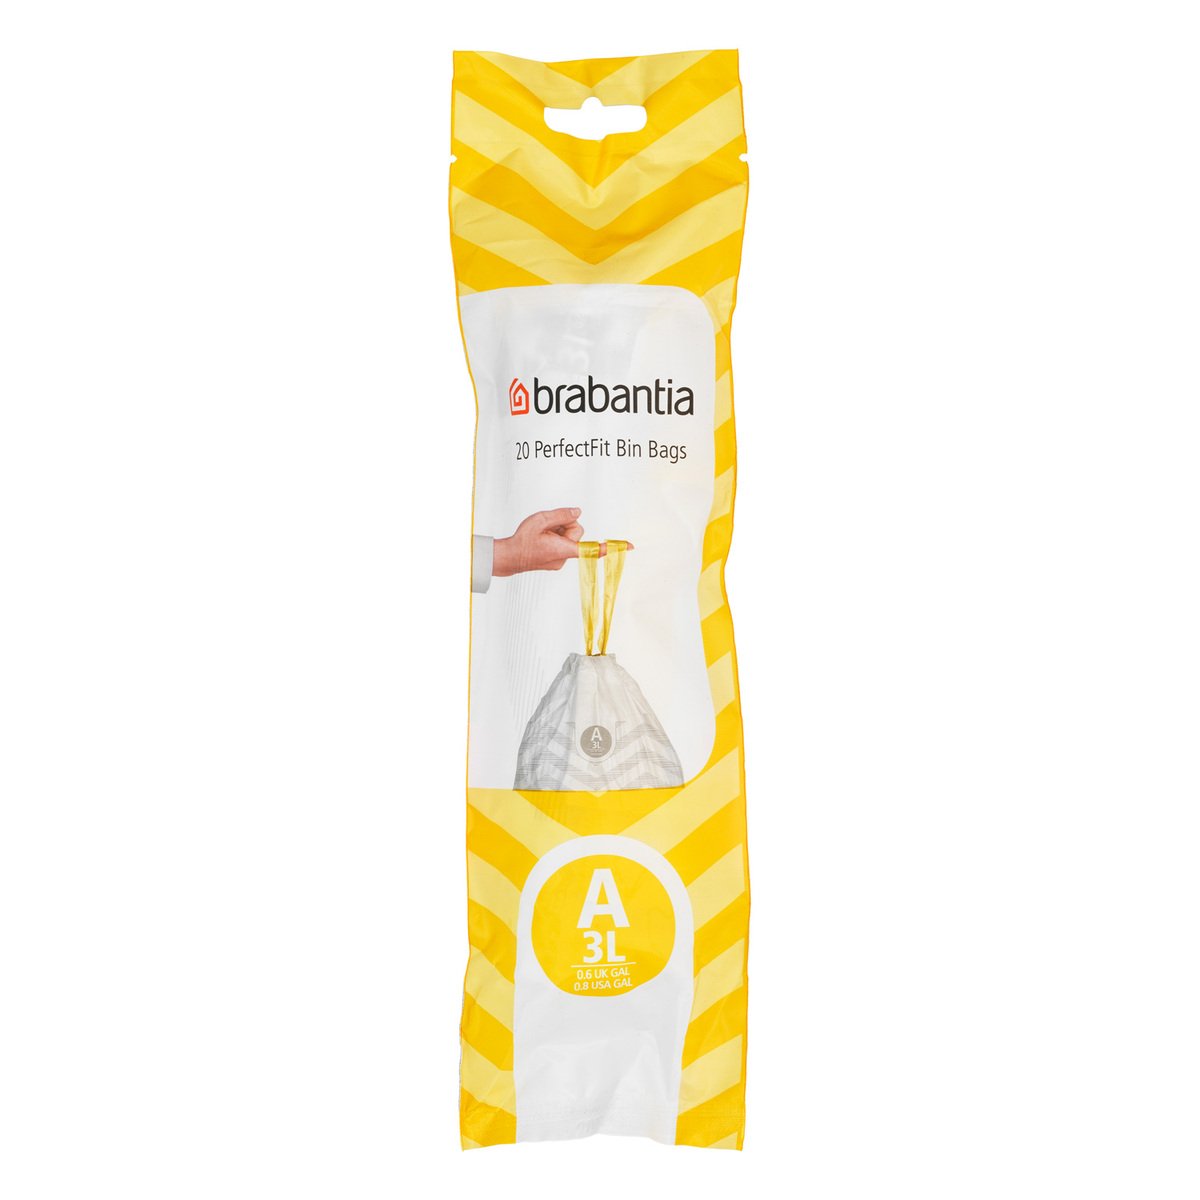 https://media.fds.fi/product_image/PerfectFit-Bags-Code-A-3L-20-Bags-White-8710755311727-Brabantia_300dpi_5000x7000px_6_NR-25668.jpg